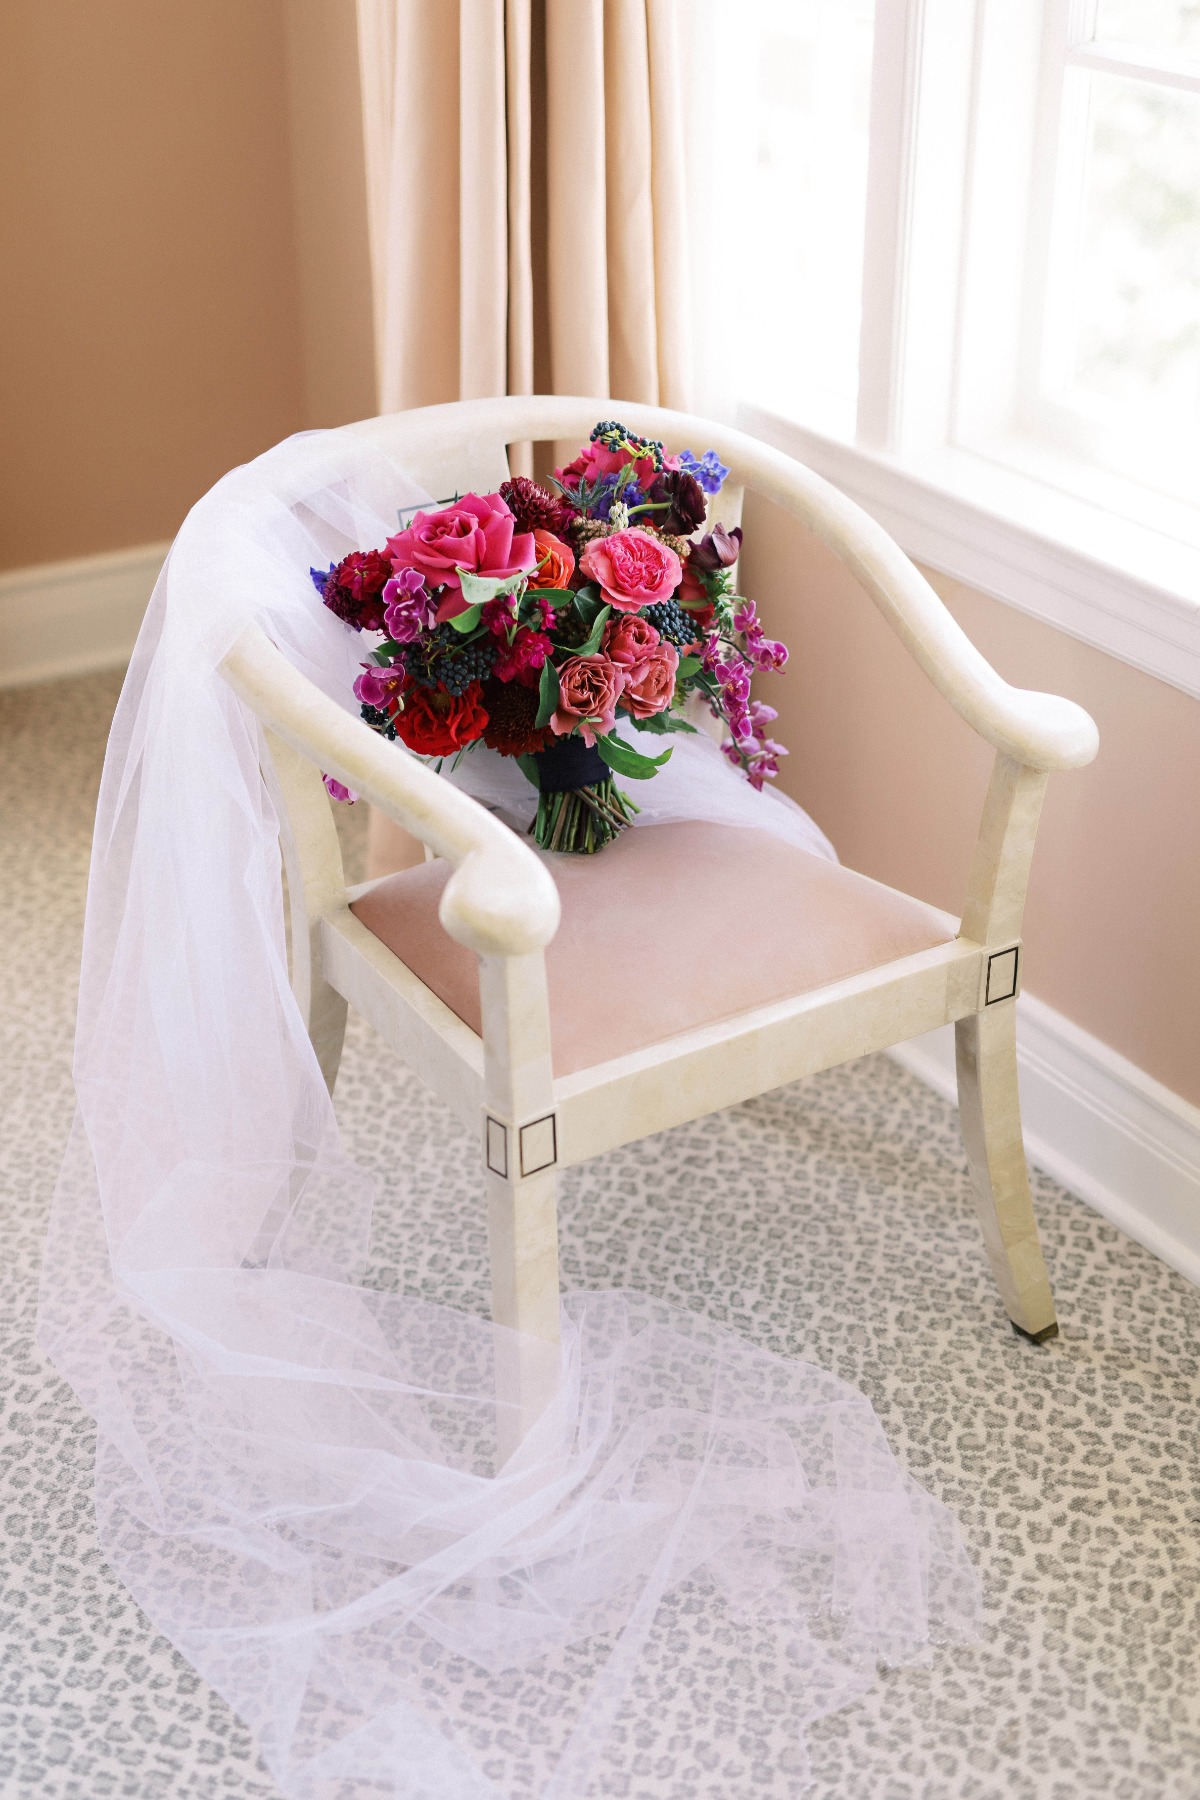 Veil draped over chair that included bouquet leaning on chair